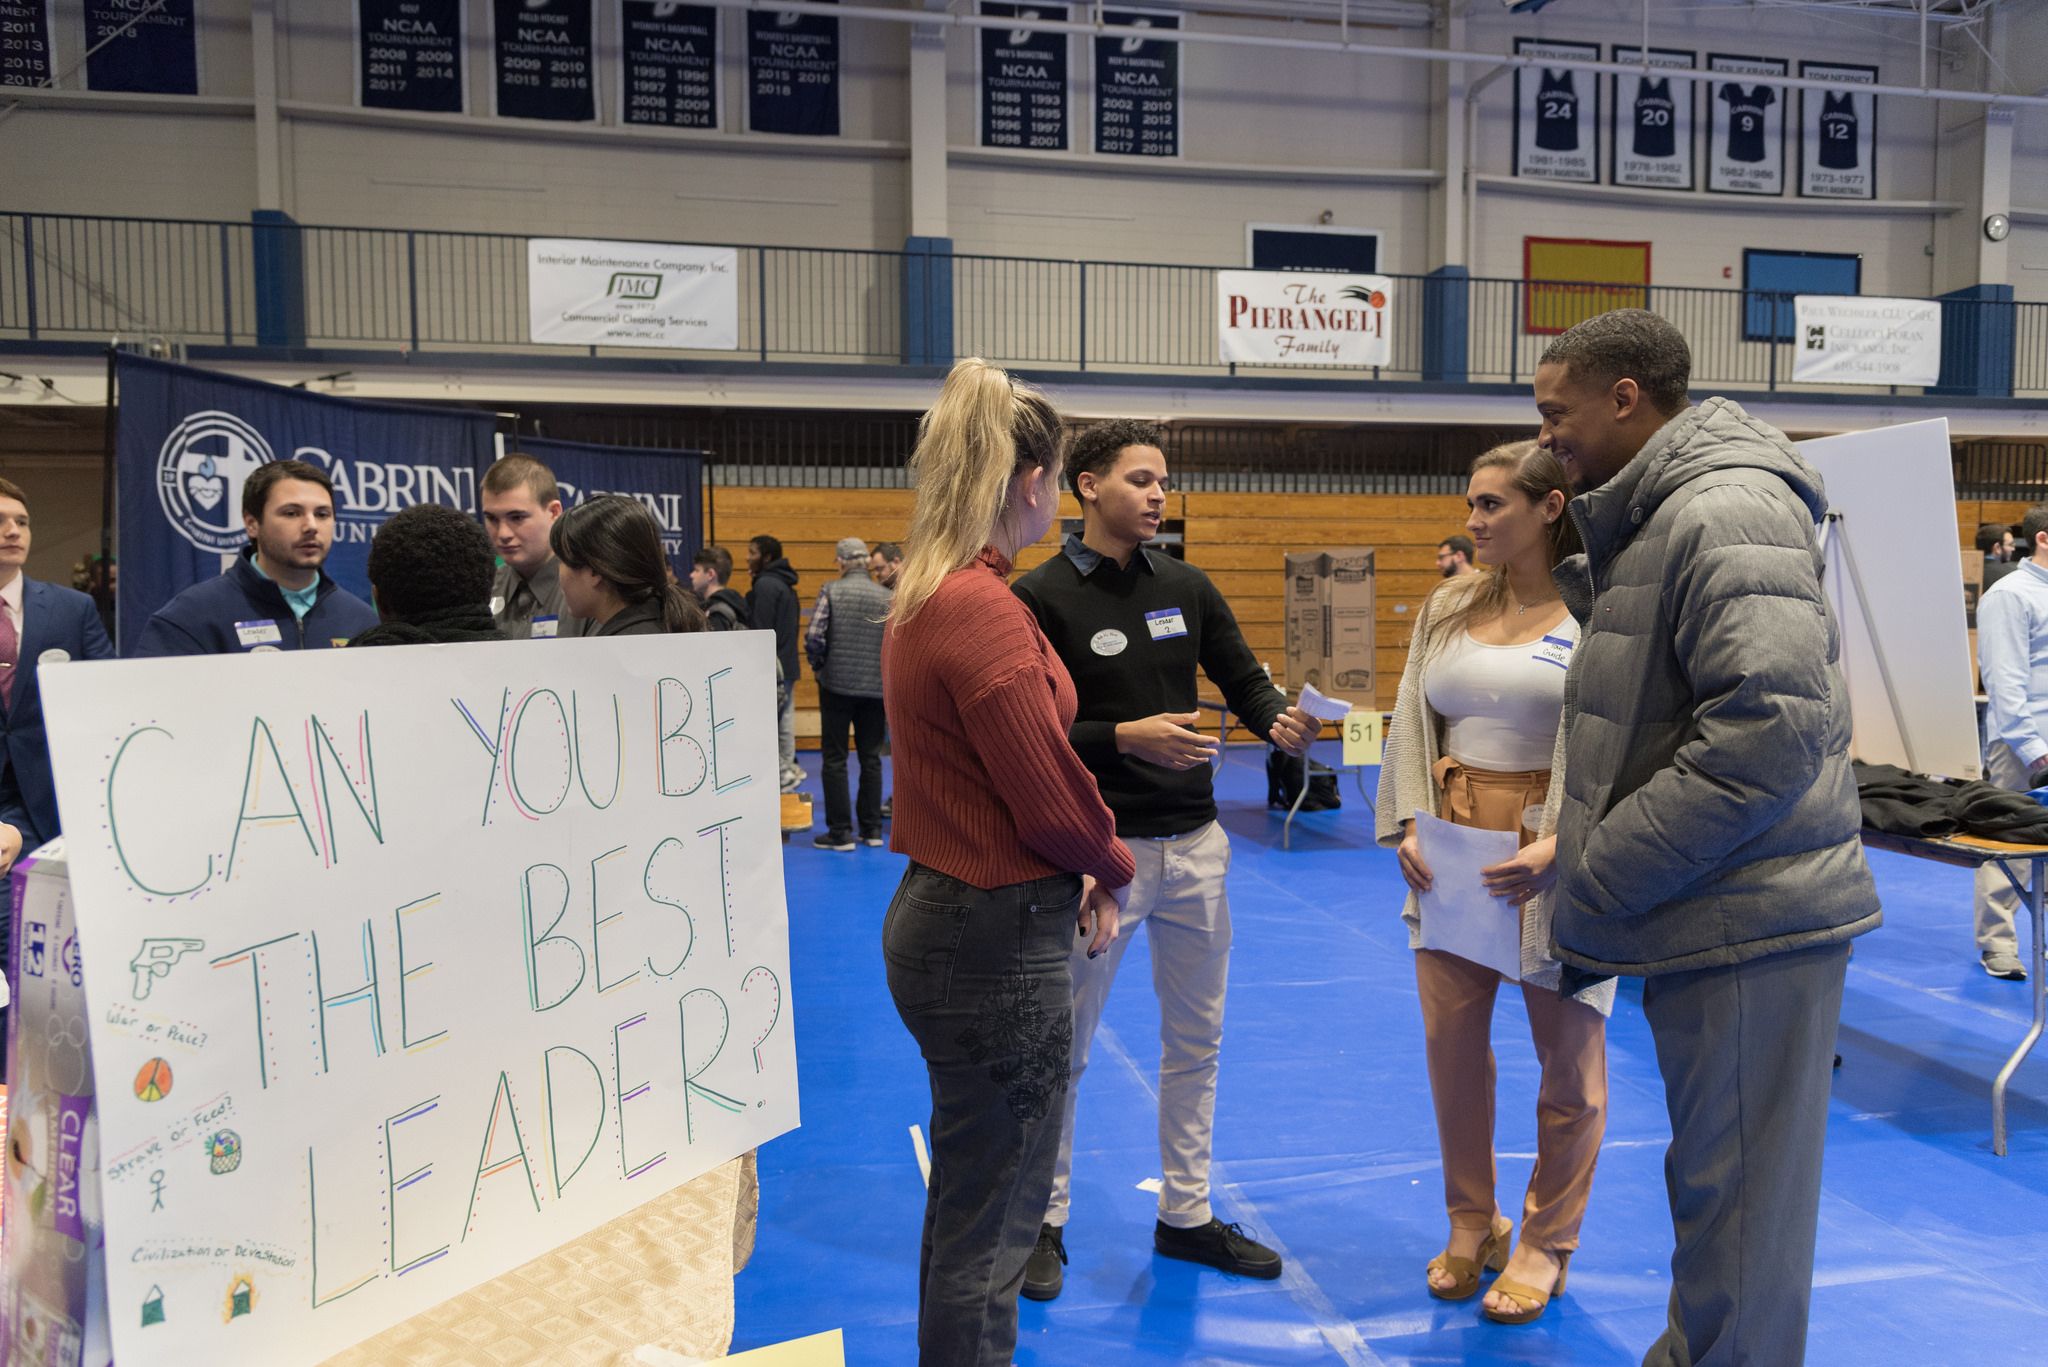 Here is an image taken at Cabrini Day during the student presentations. (Photo taken on the Cabrini Universities' flickr page). 